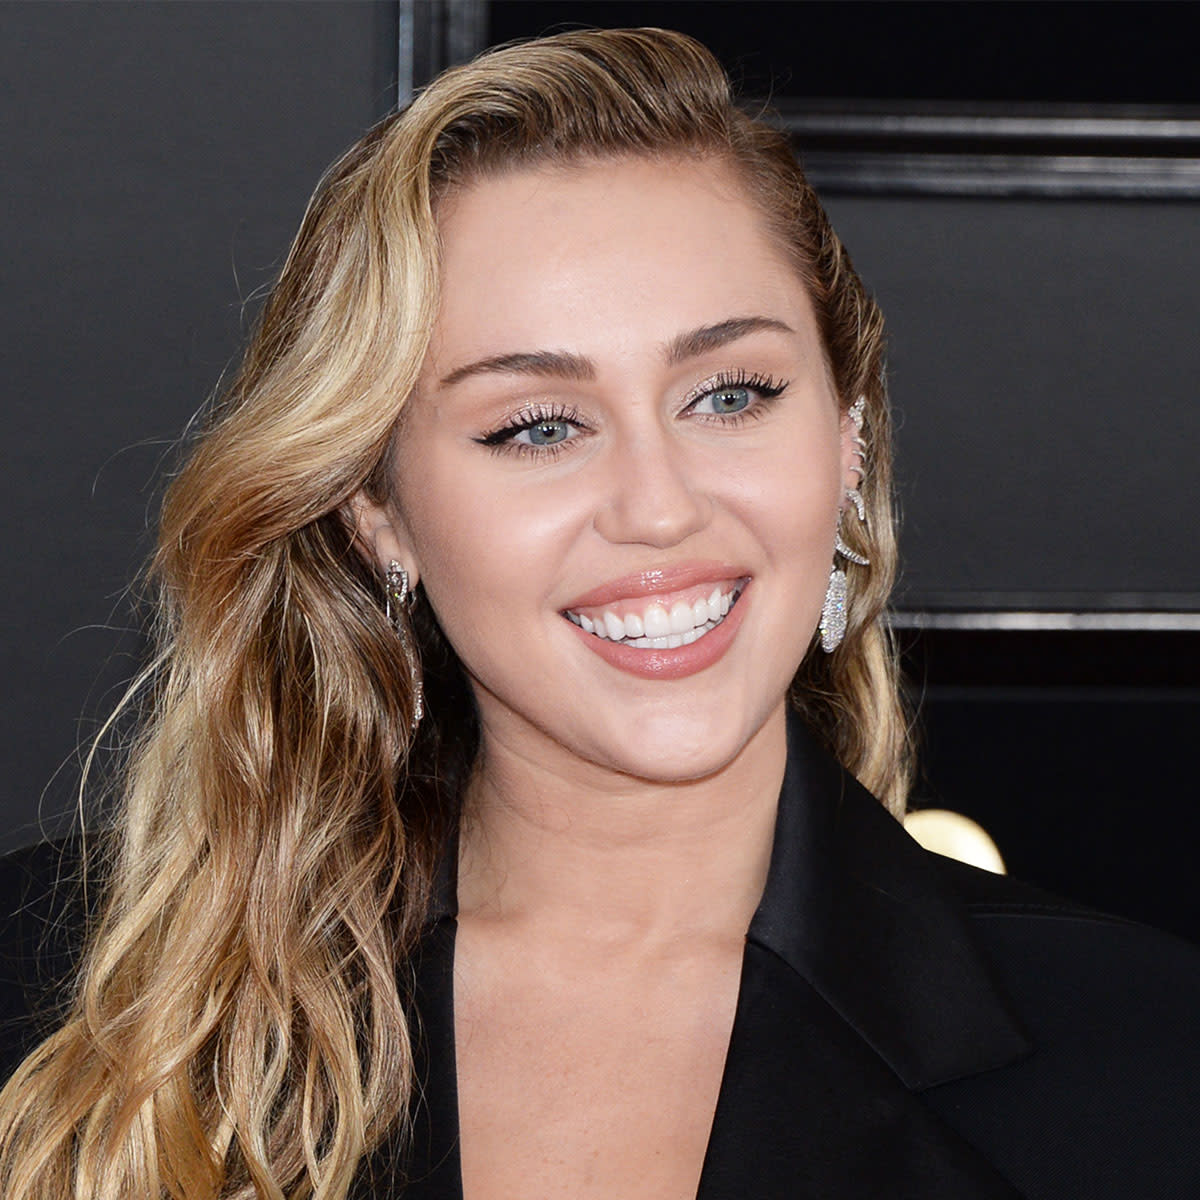 Miley Cyrus Flaunts Her Insane Body In A High Cut White One Piece On Instagram